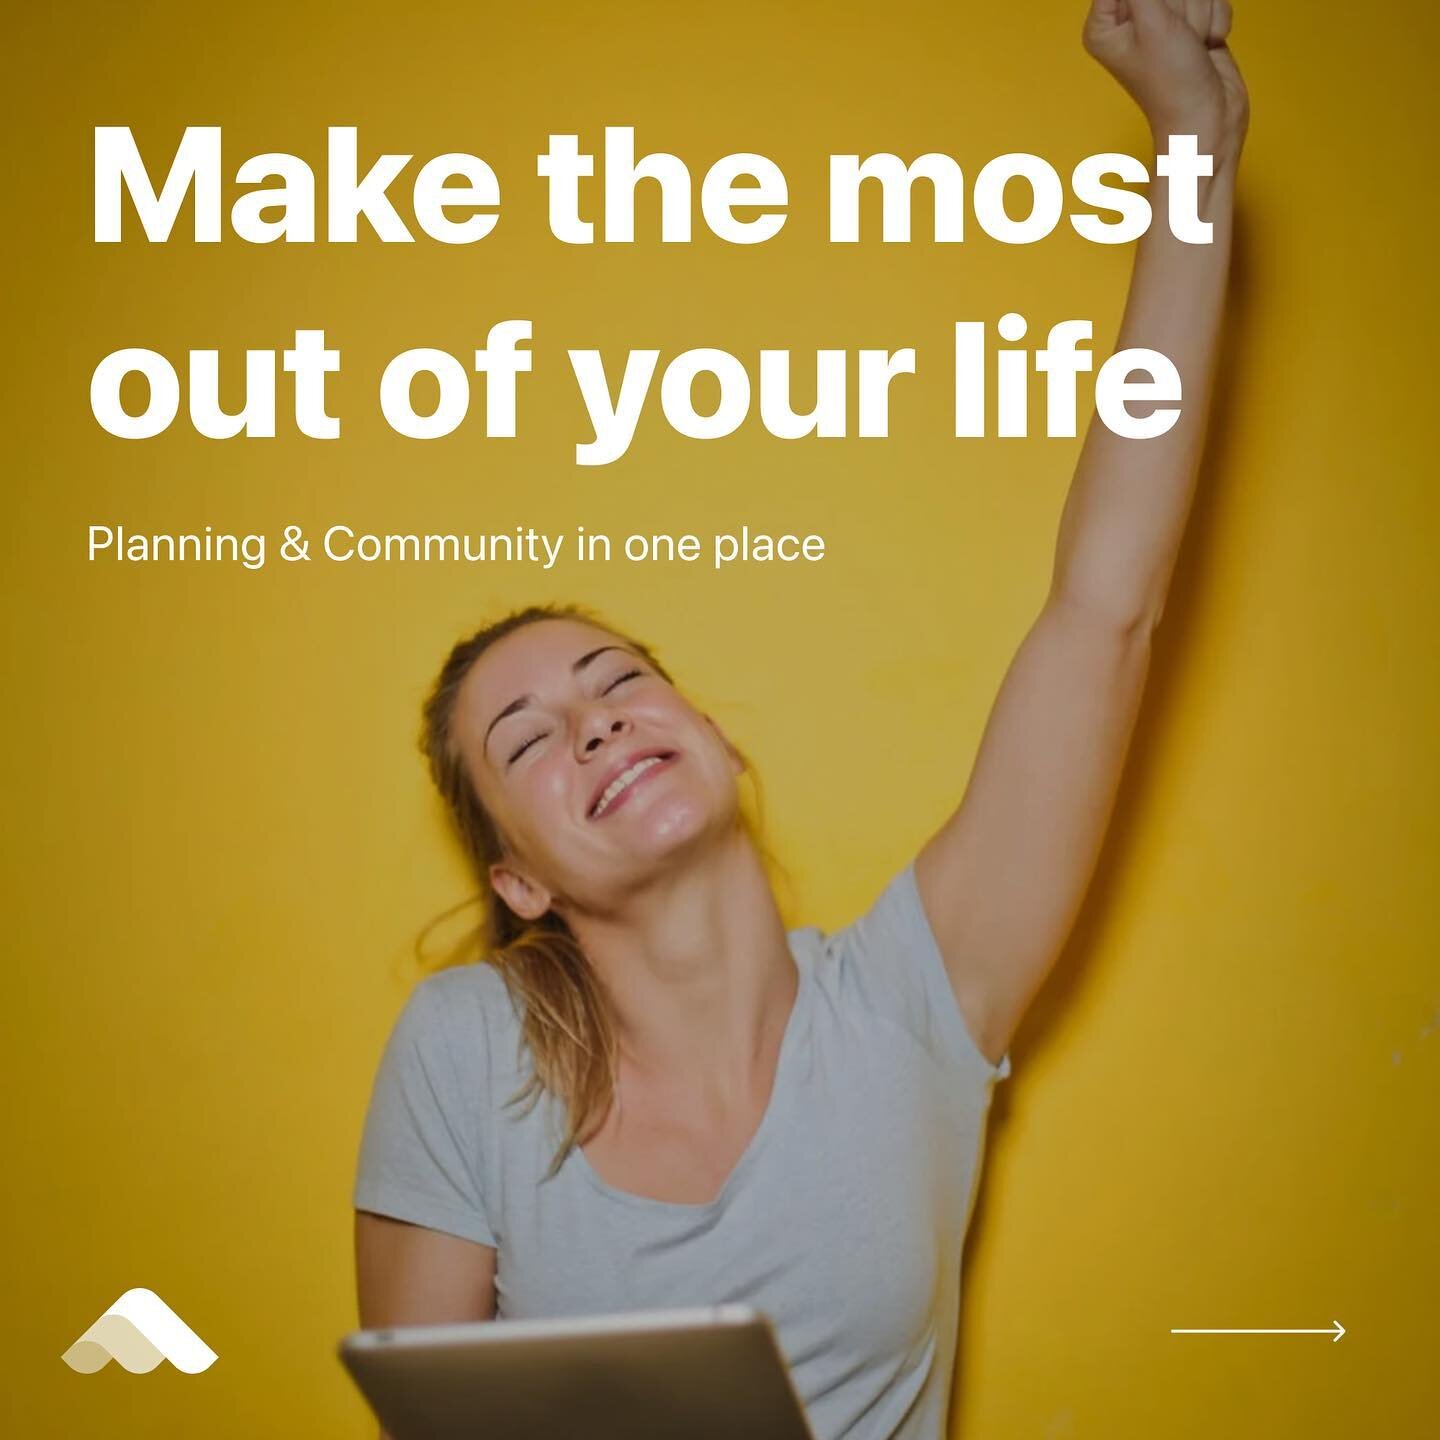 Start making the most out of your life by using ByDesign.

ByDesign brings planning and community together to help you achieve your full potential 💯 

Download the app from the link in bio!

#plan#community#timemanagement#boston#bostonuniversity#stu